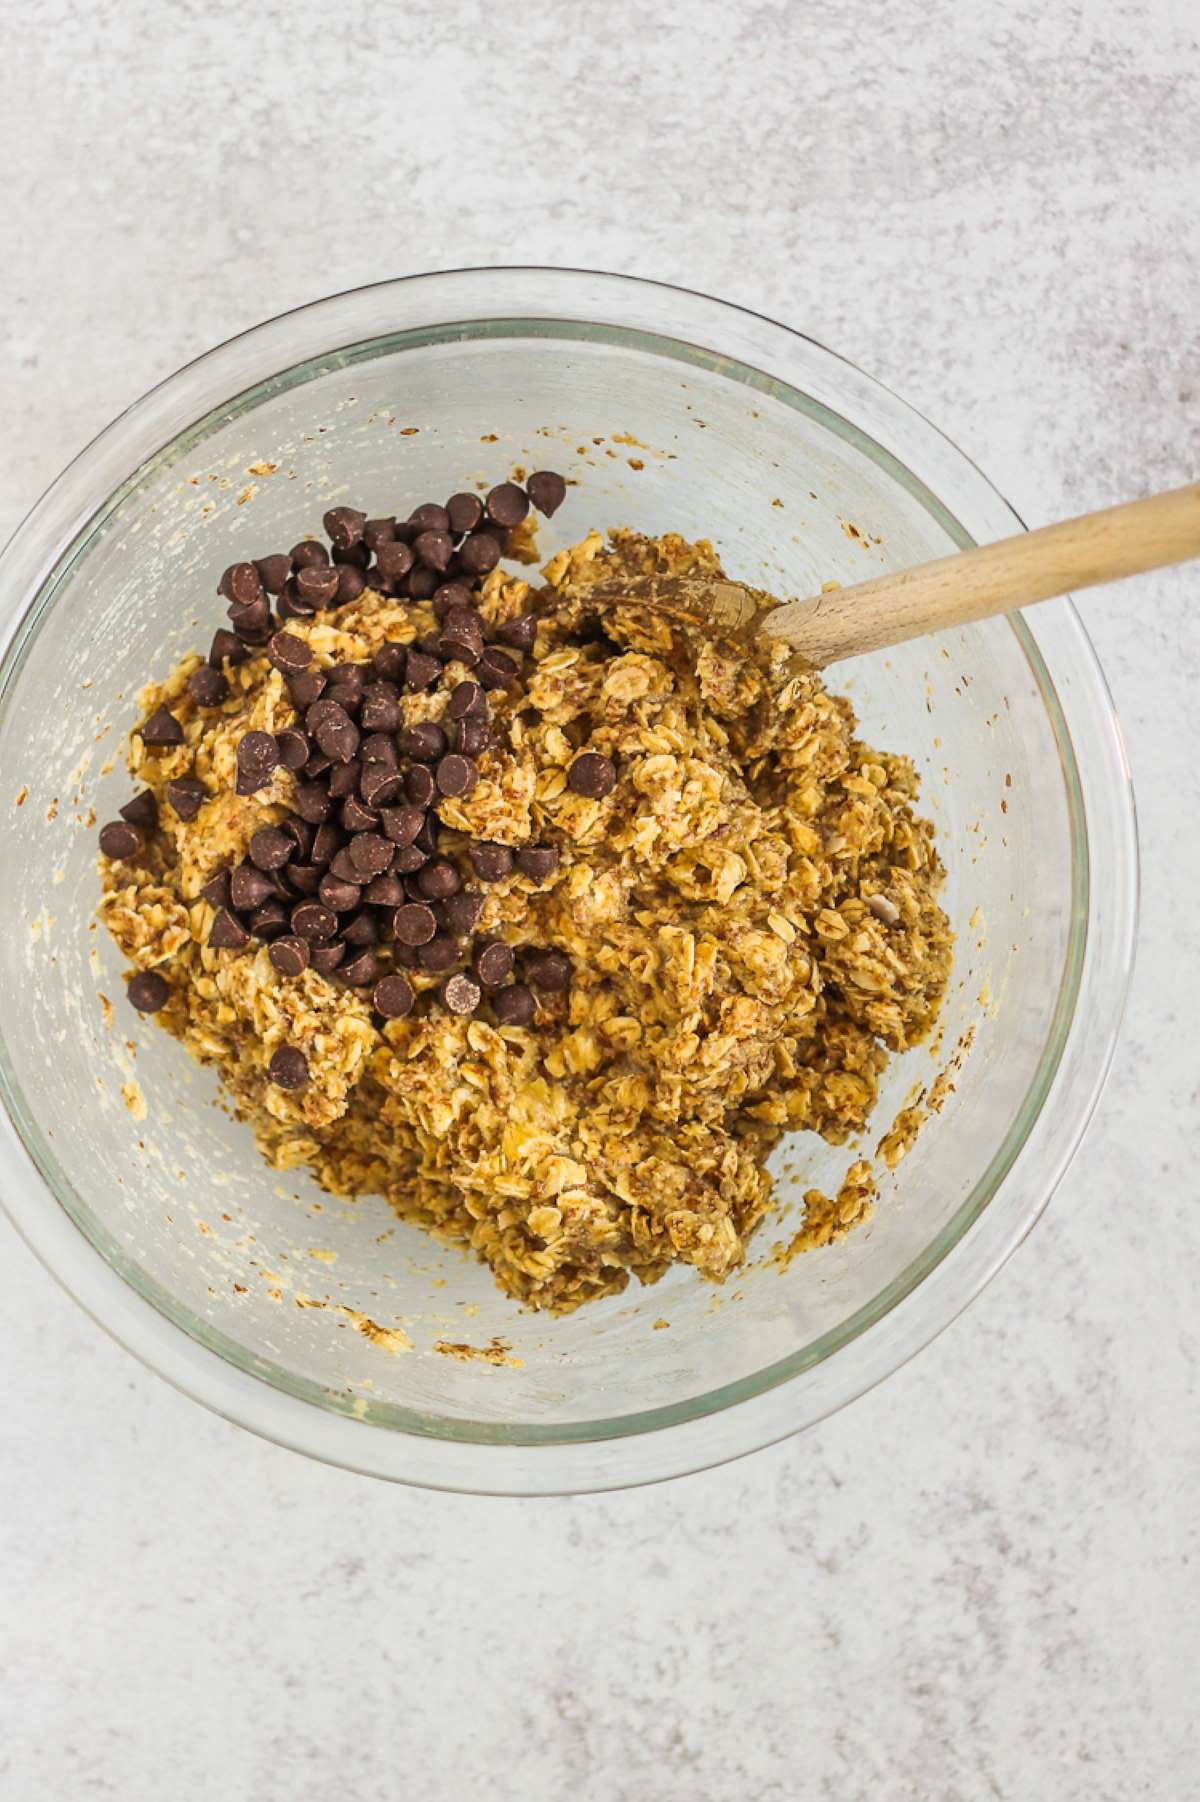 Oat mixture in a mixing bowl with chocolate chips and a wooden mixing spoon.